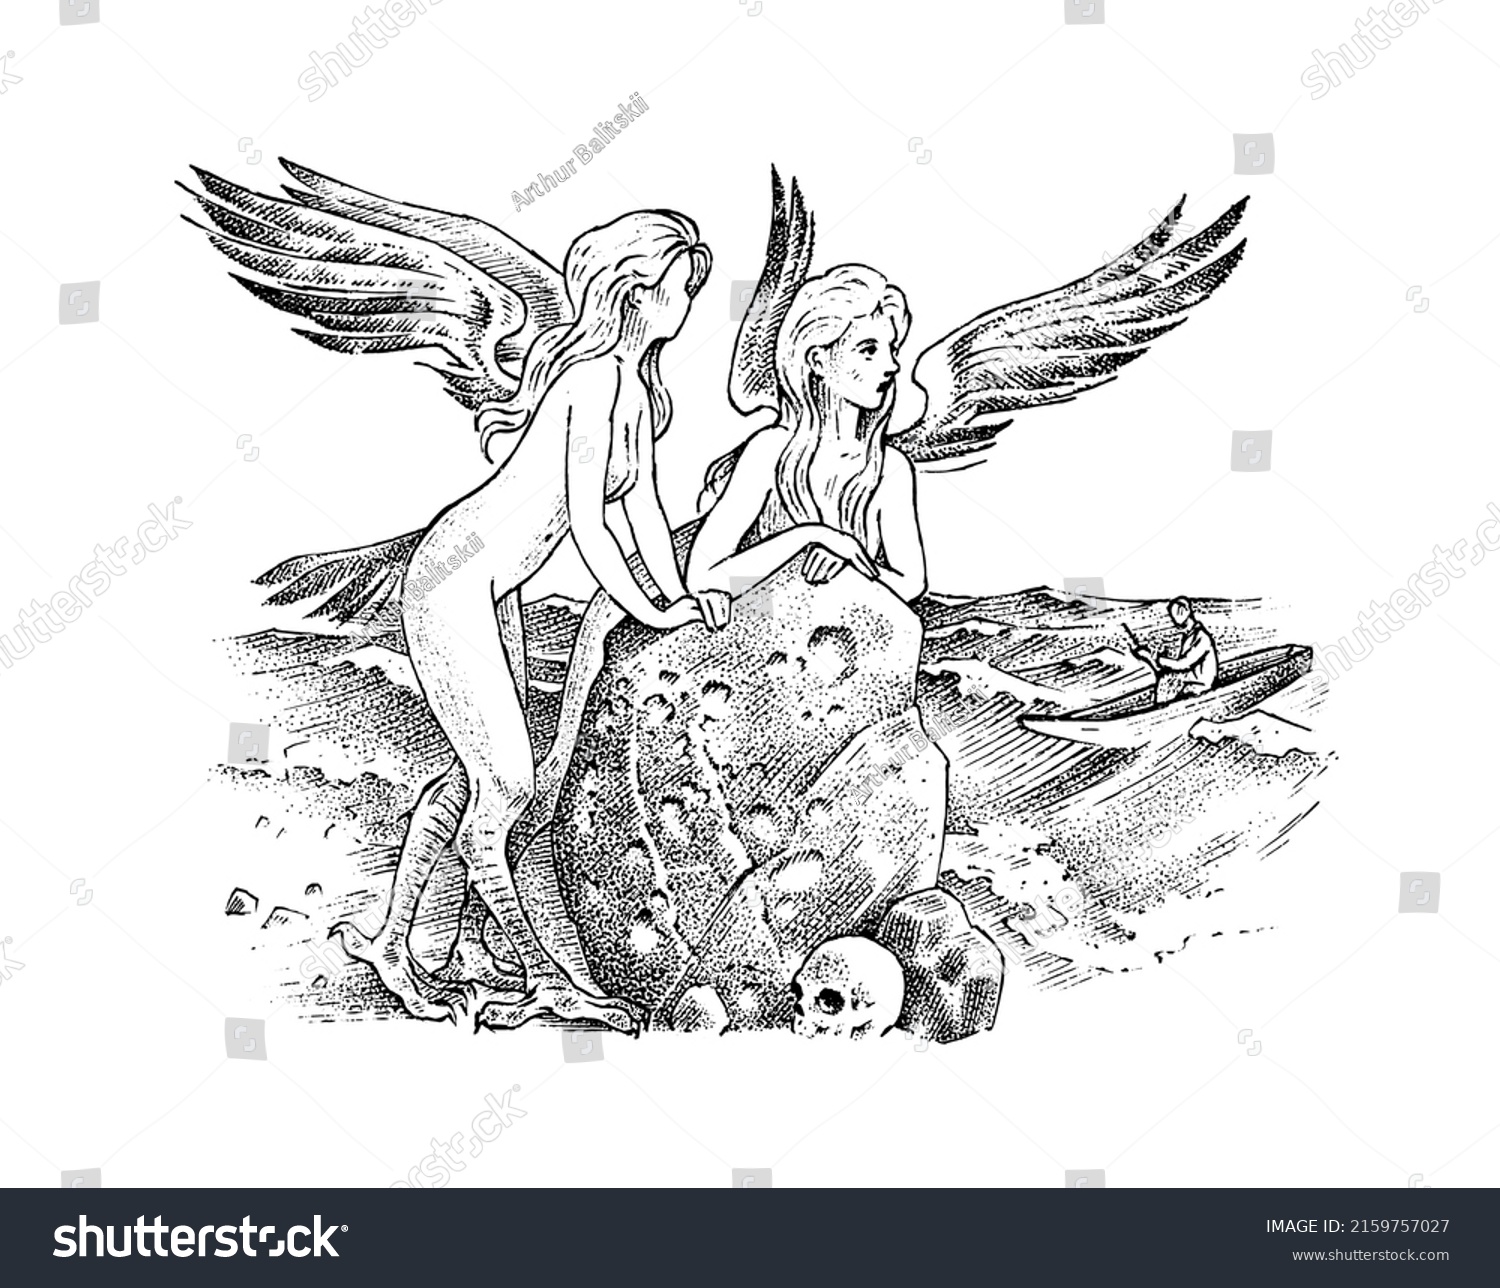 Myths of ancient Greece. Sirens with wings calling sailors. Odyssey. girls stand by a stone against the backdrop of the sea. Homer. Character sketch. Hand drawn vintage vector illustration for book #2159757027